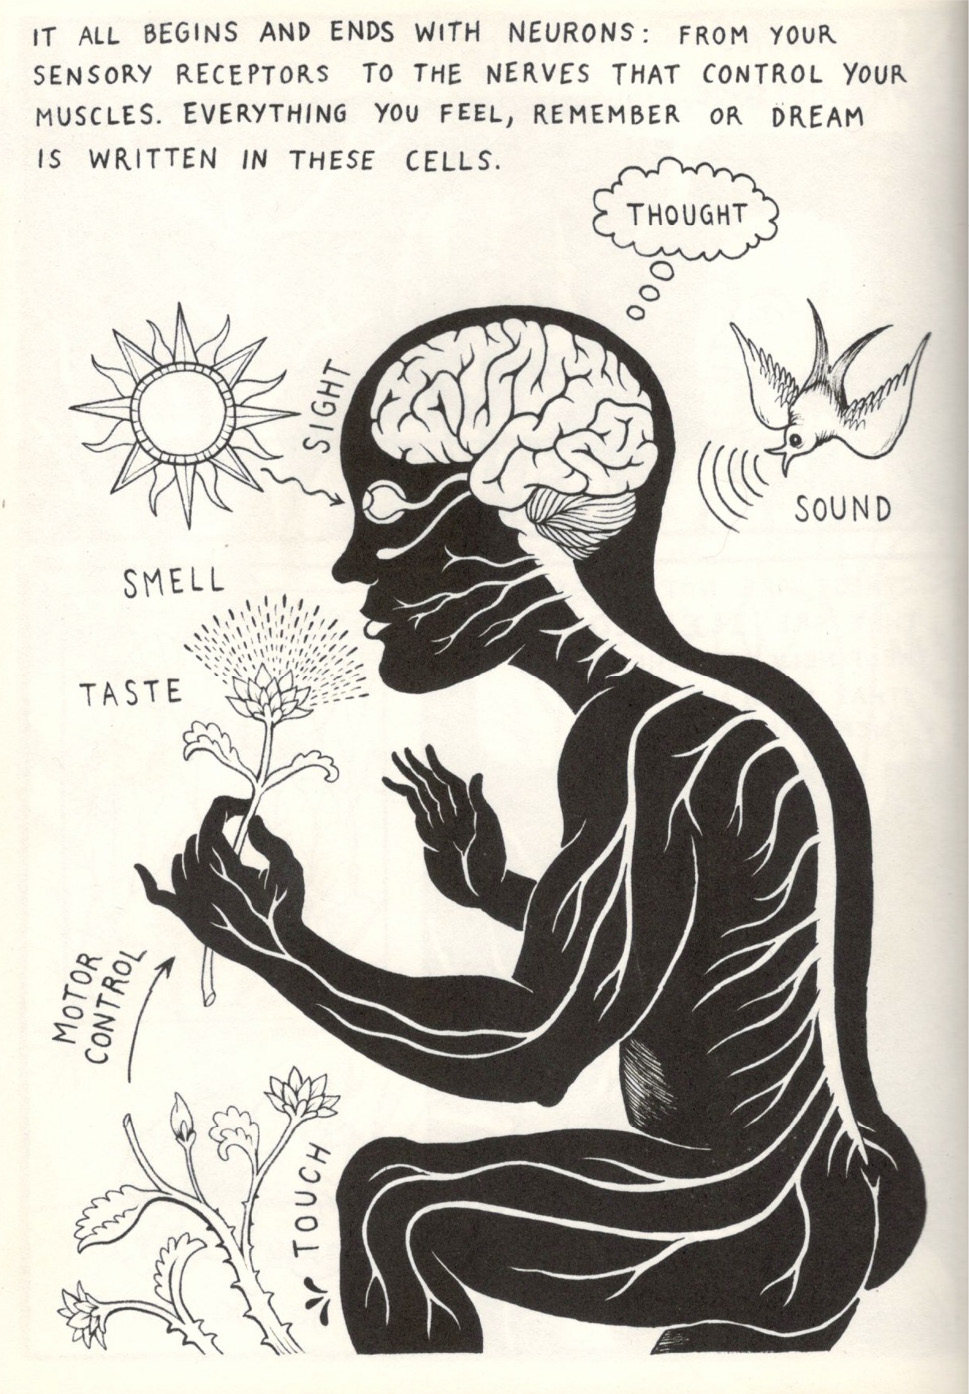 A human body is pictured with neural pathways visibly connecting their brain and spine to the nerve endings in their eye, nose, mouth and limbs. The person is smelling a flower, surrounding by sunlight, a bird, and a thorny branch. Words besid the body indicate the different neural activities: 'touch', 'sight', 'sound', 'smell', 'taste', 'motor control' and 'taste'. The explanatory text in the image reads: 'It all begins and ends with neurons: from your sensory receptors to the nerves that control your muscles. Everything you feel, remember or dream is written in these cells.'